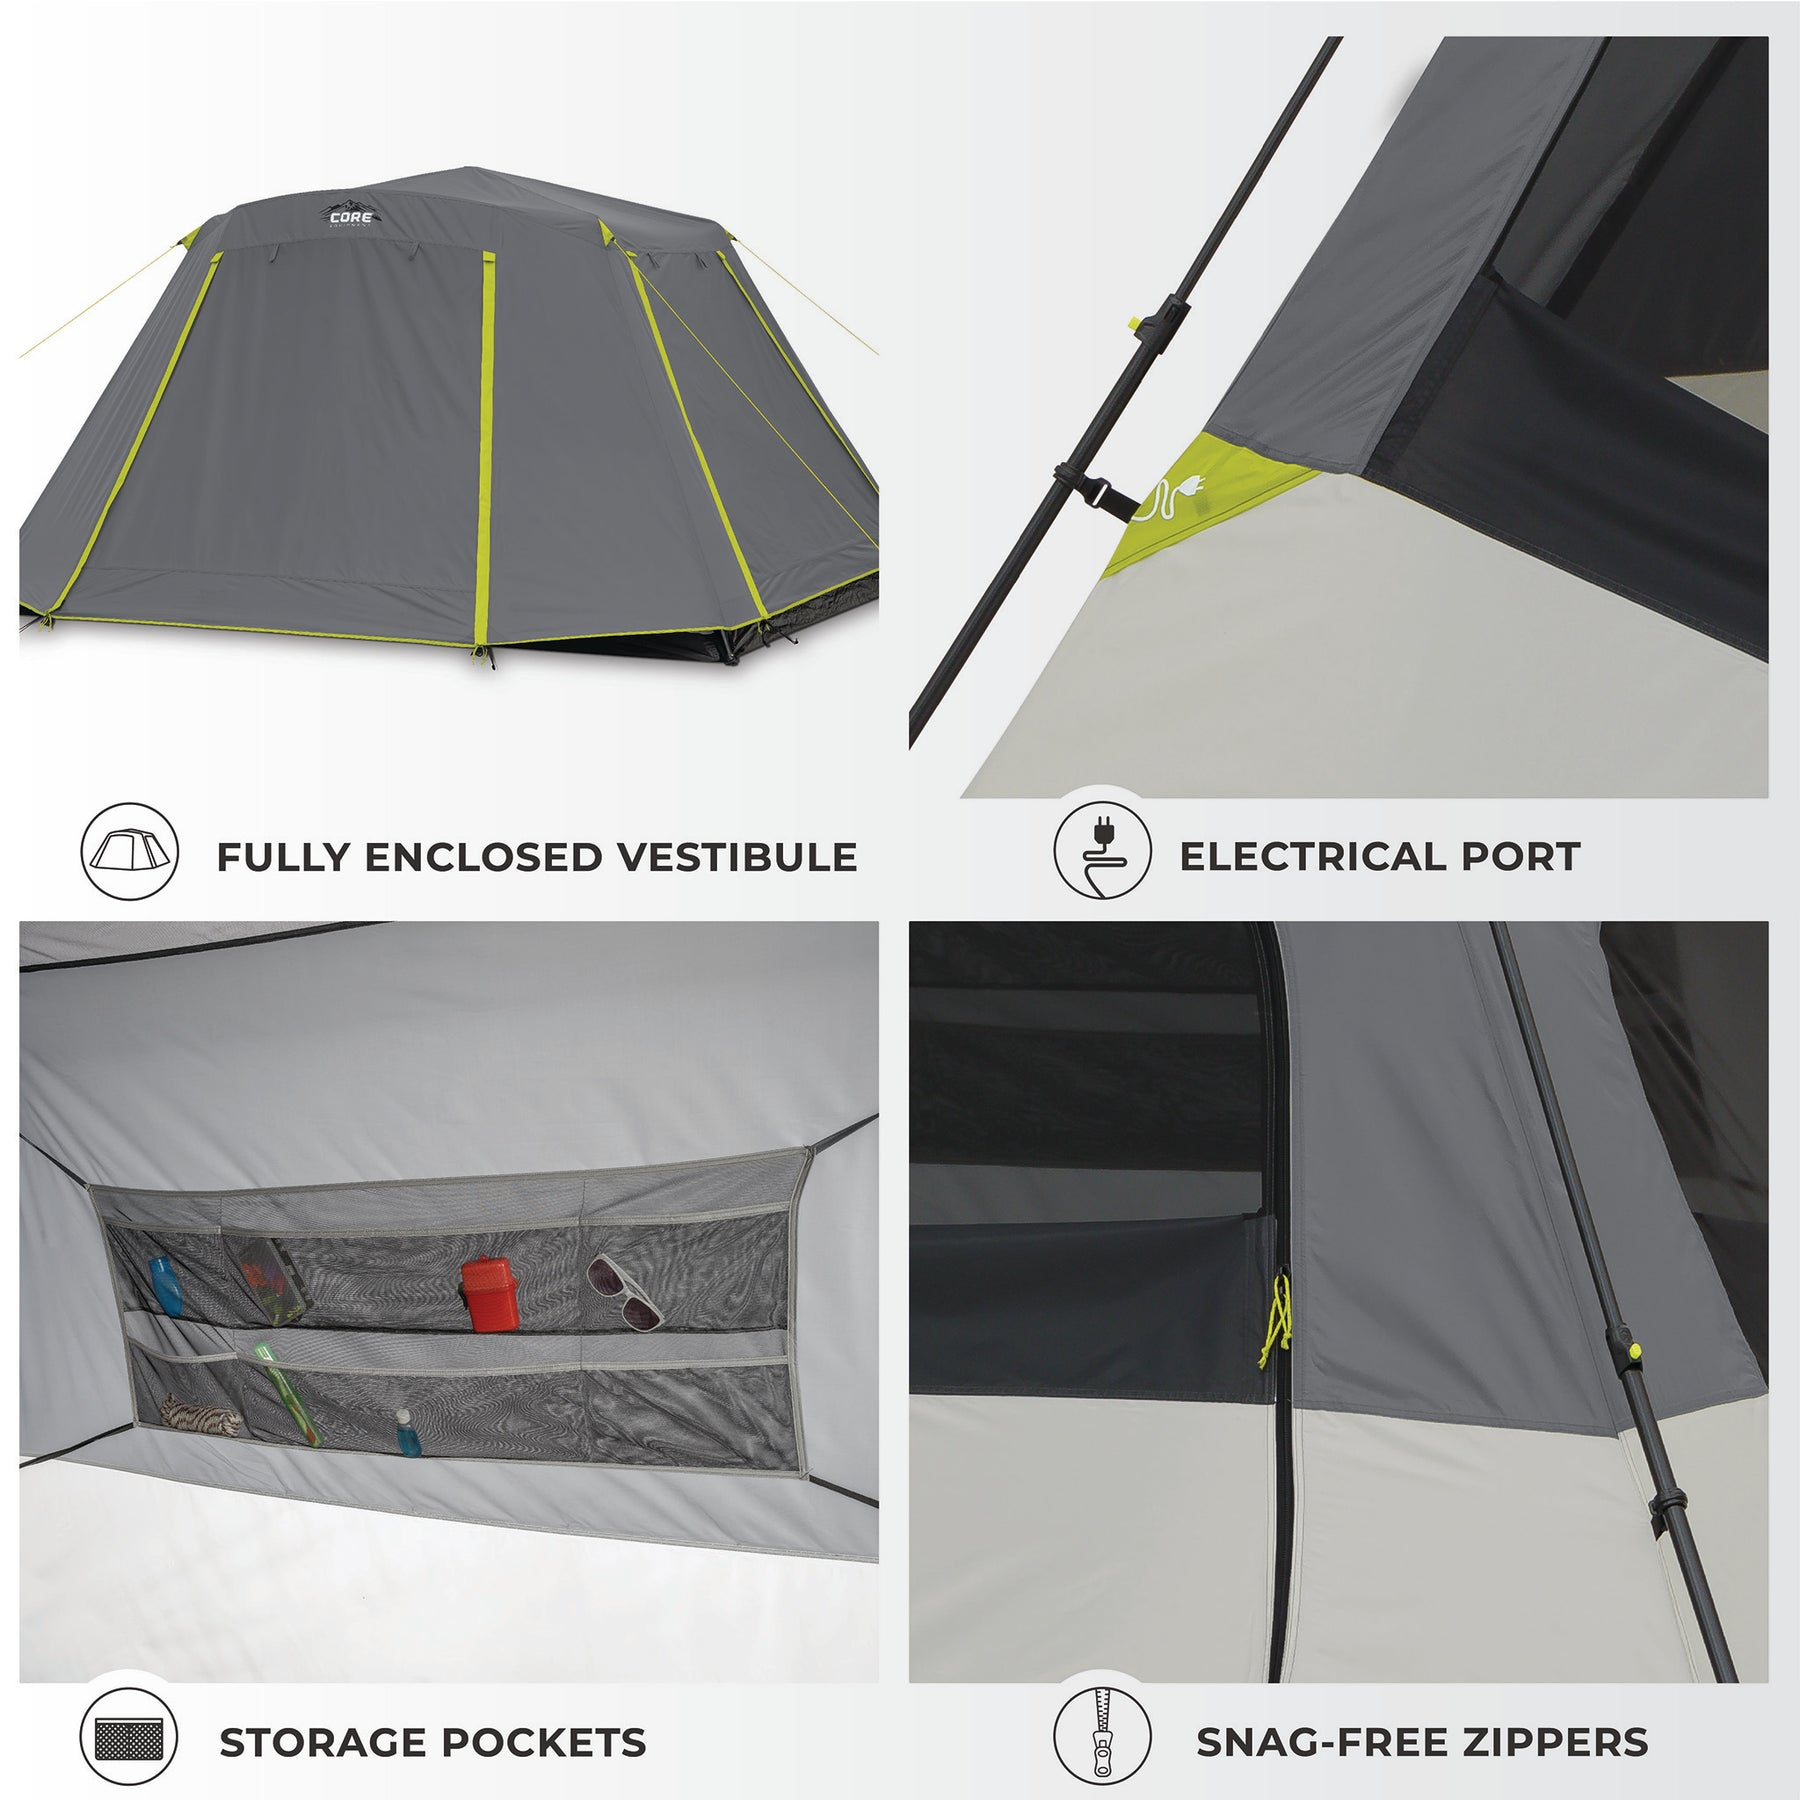 CORE® Equipment 6 Person Instant Cabin Tent with Full Rainfly Tent